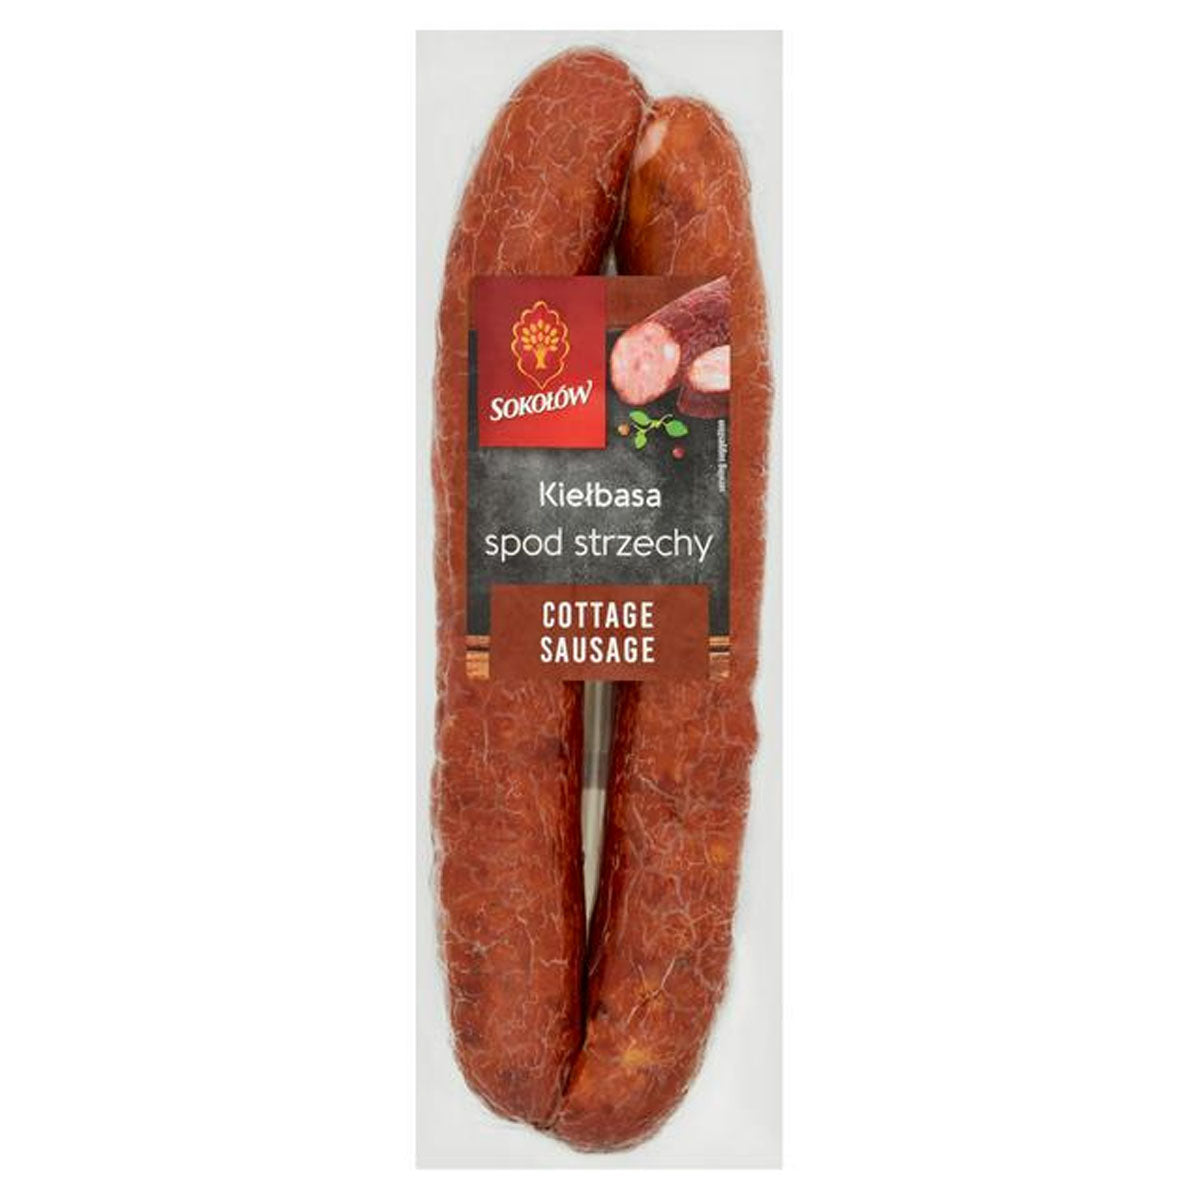 Sokolow - Cottage Sausages - 148g - Continental Food Store